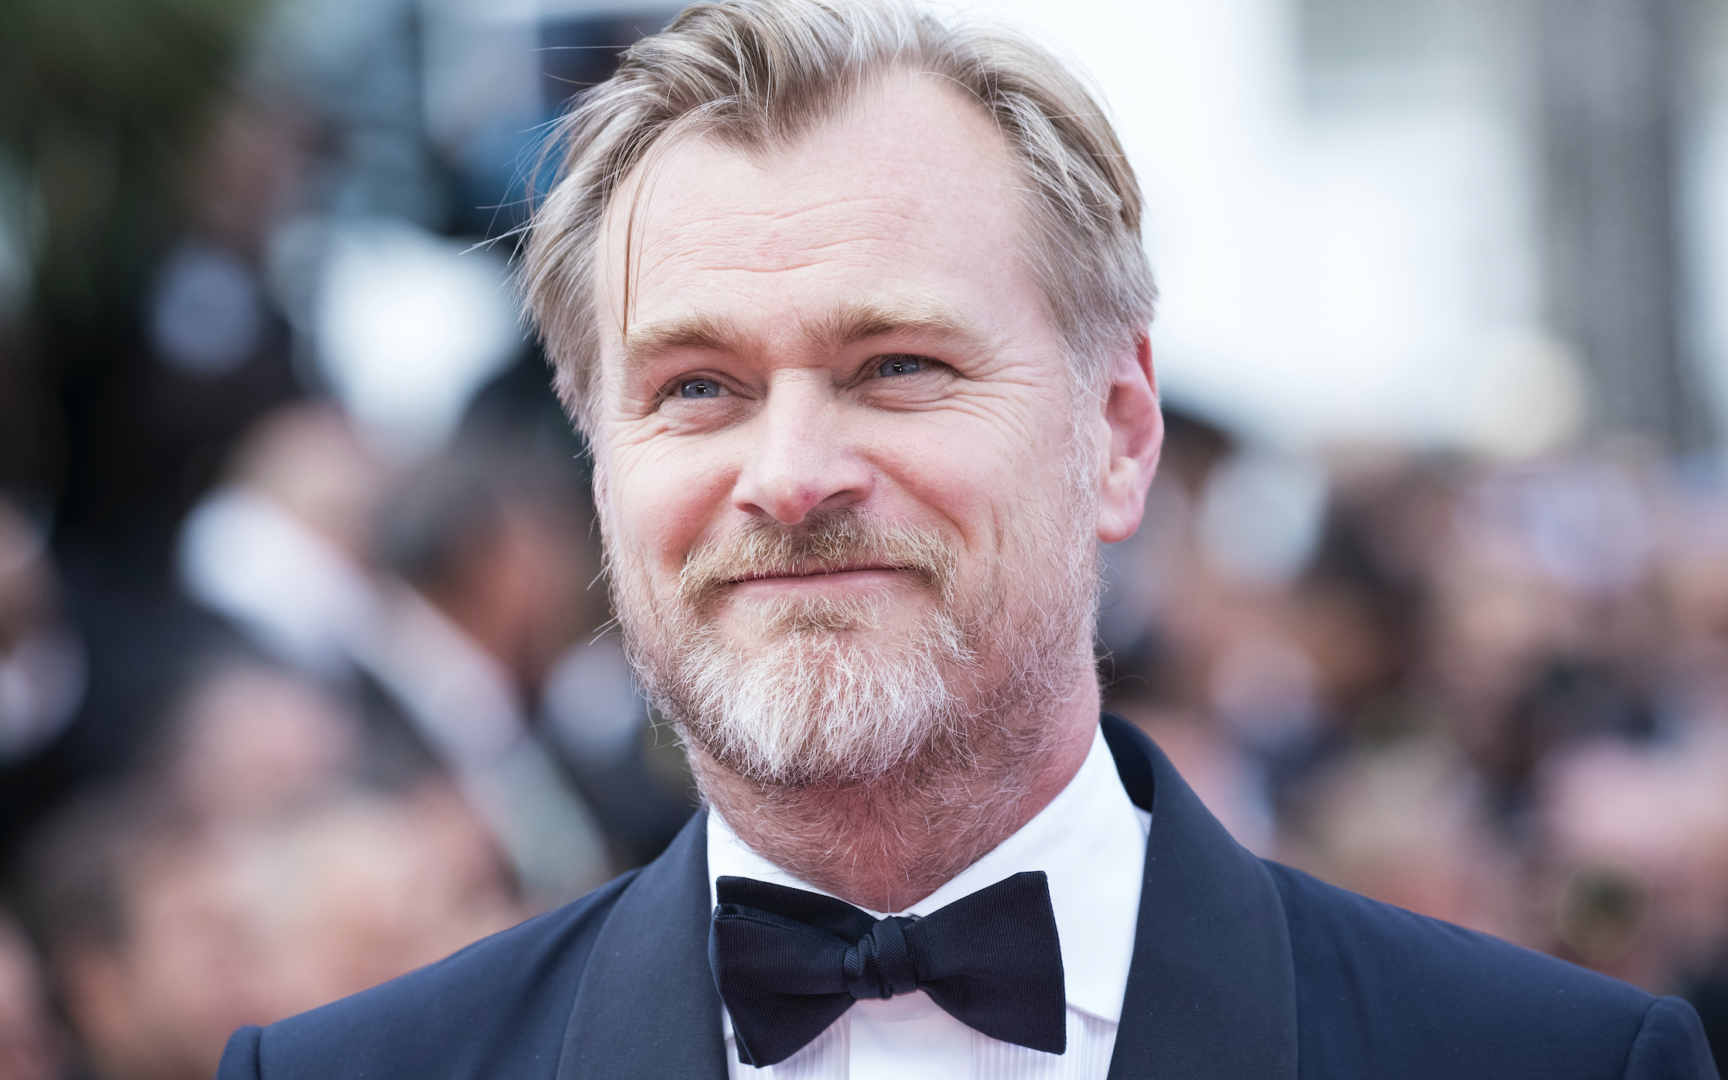 Christopher Nolan One of the First Ticket Buyers as AMC Theaters Re-Open in Los Angeles